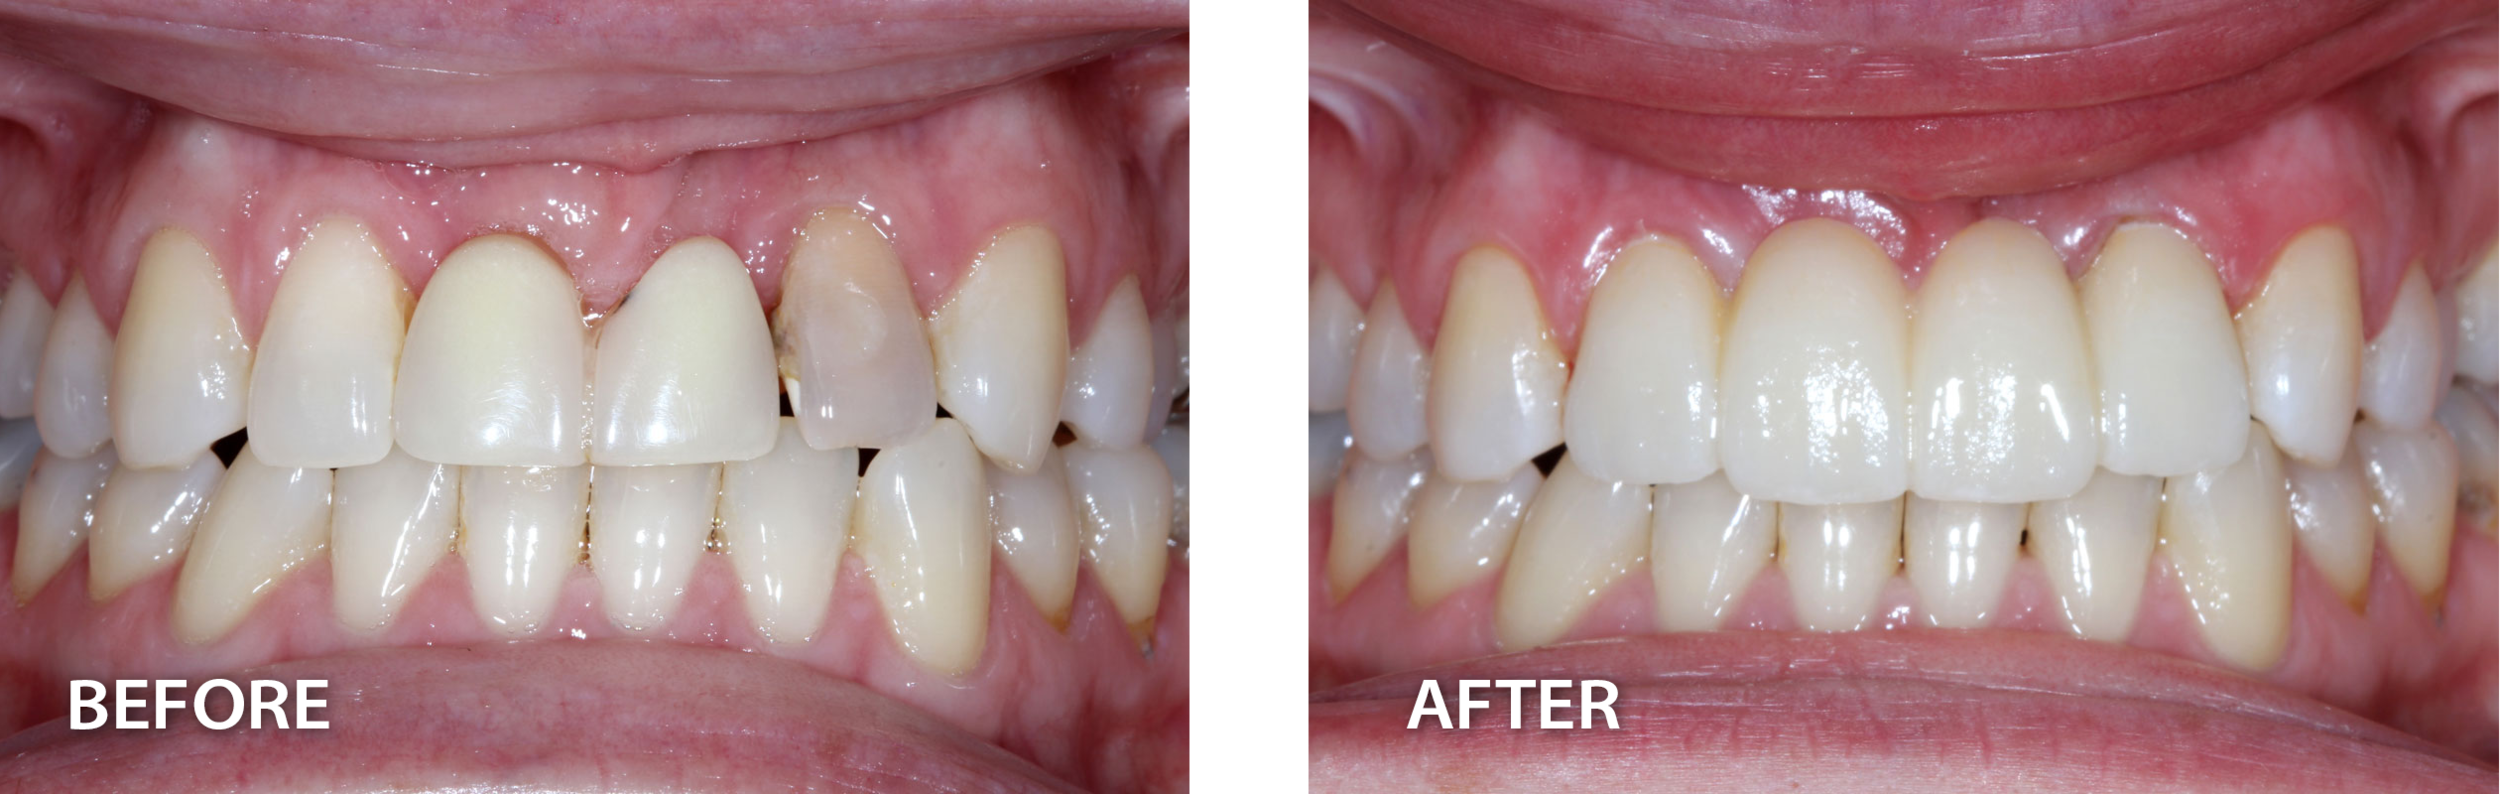  before image of smile with darkened tooth beside image of same smile with the darkened tooth fixed from dental procedure 